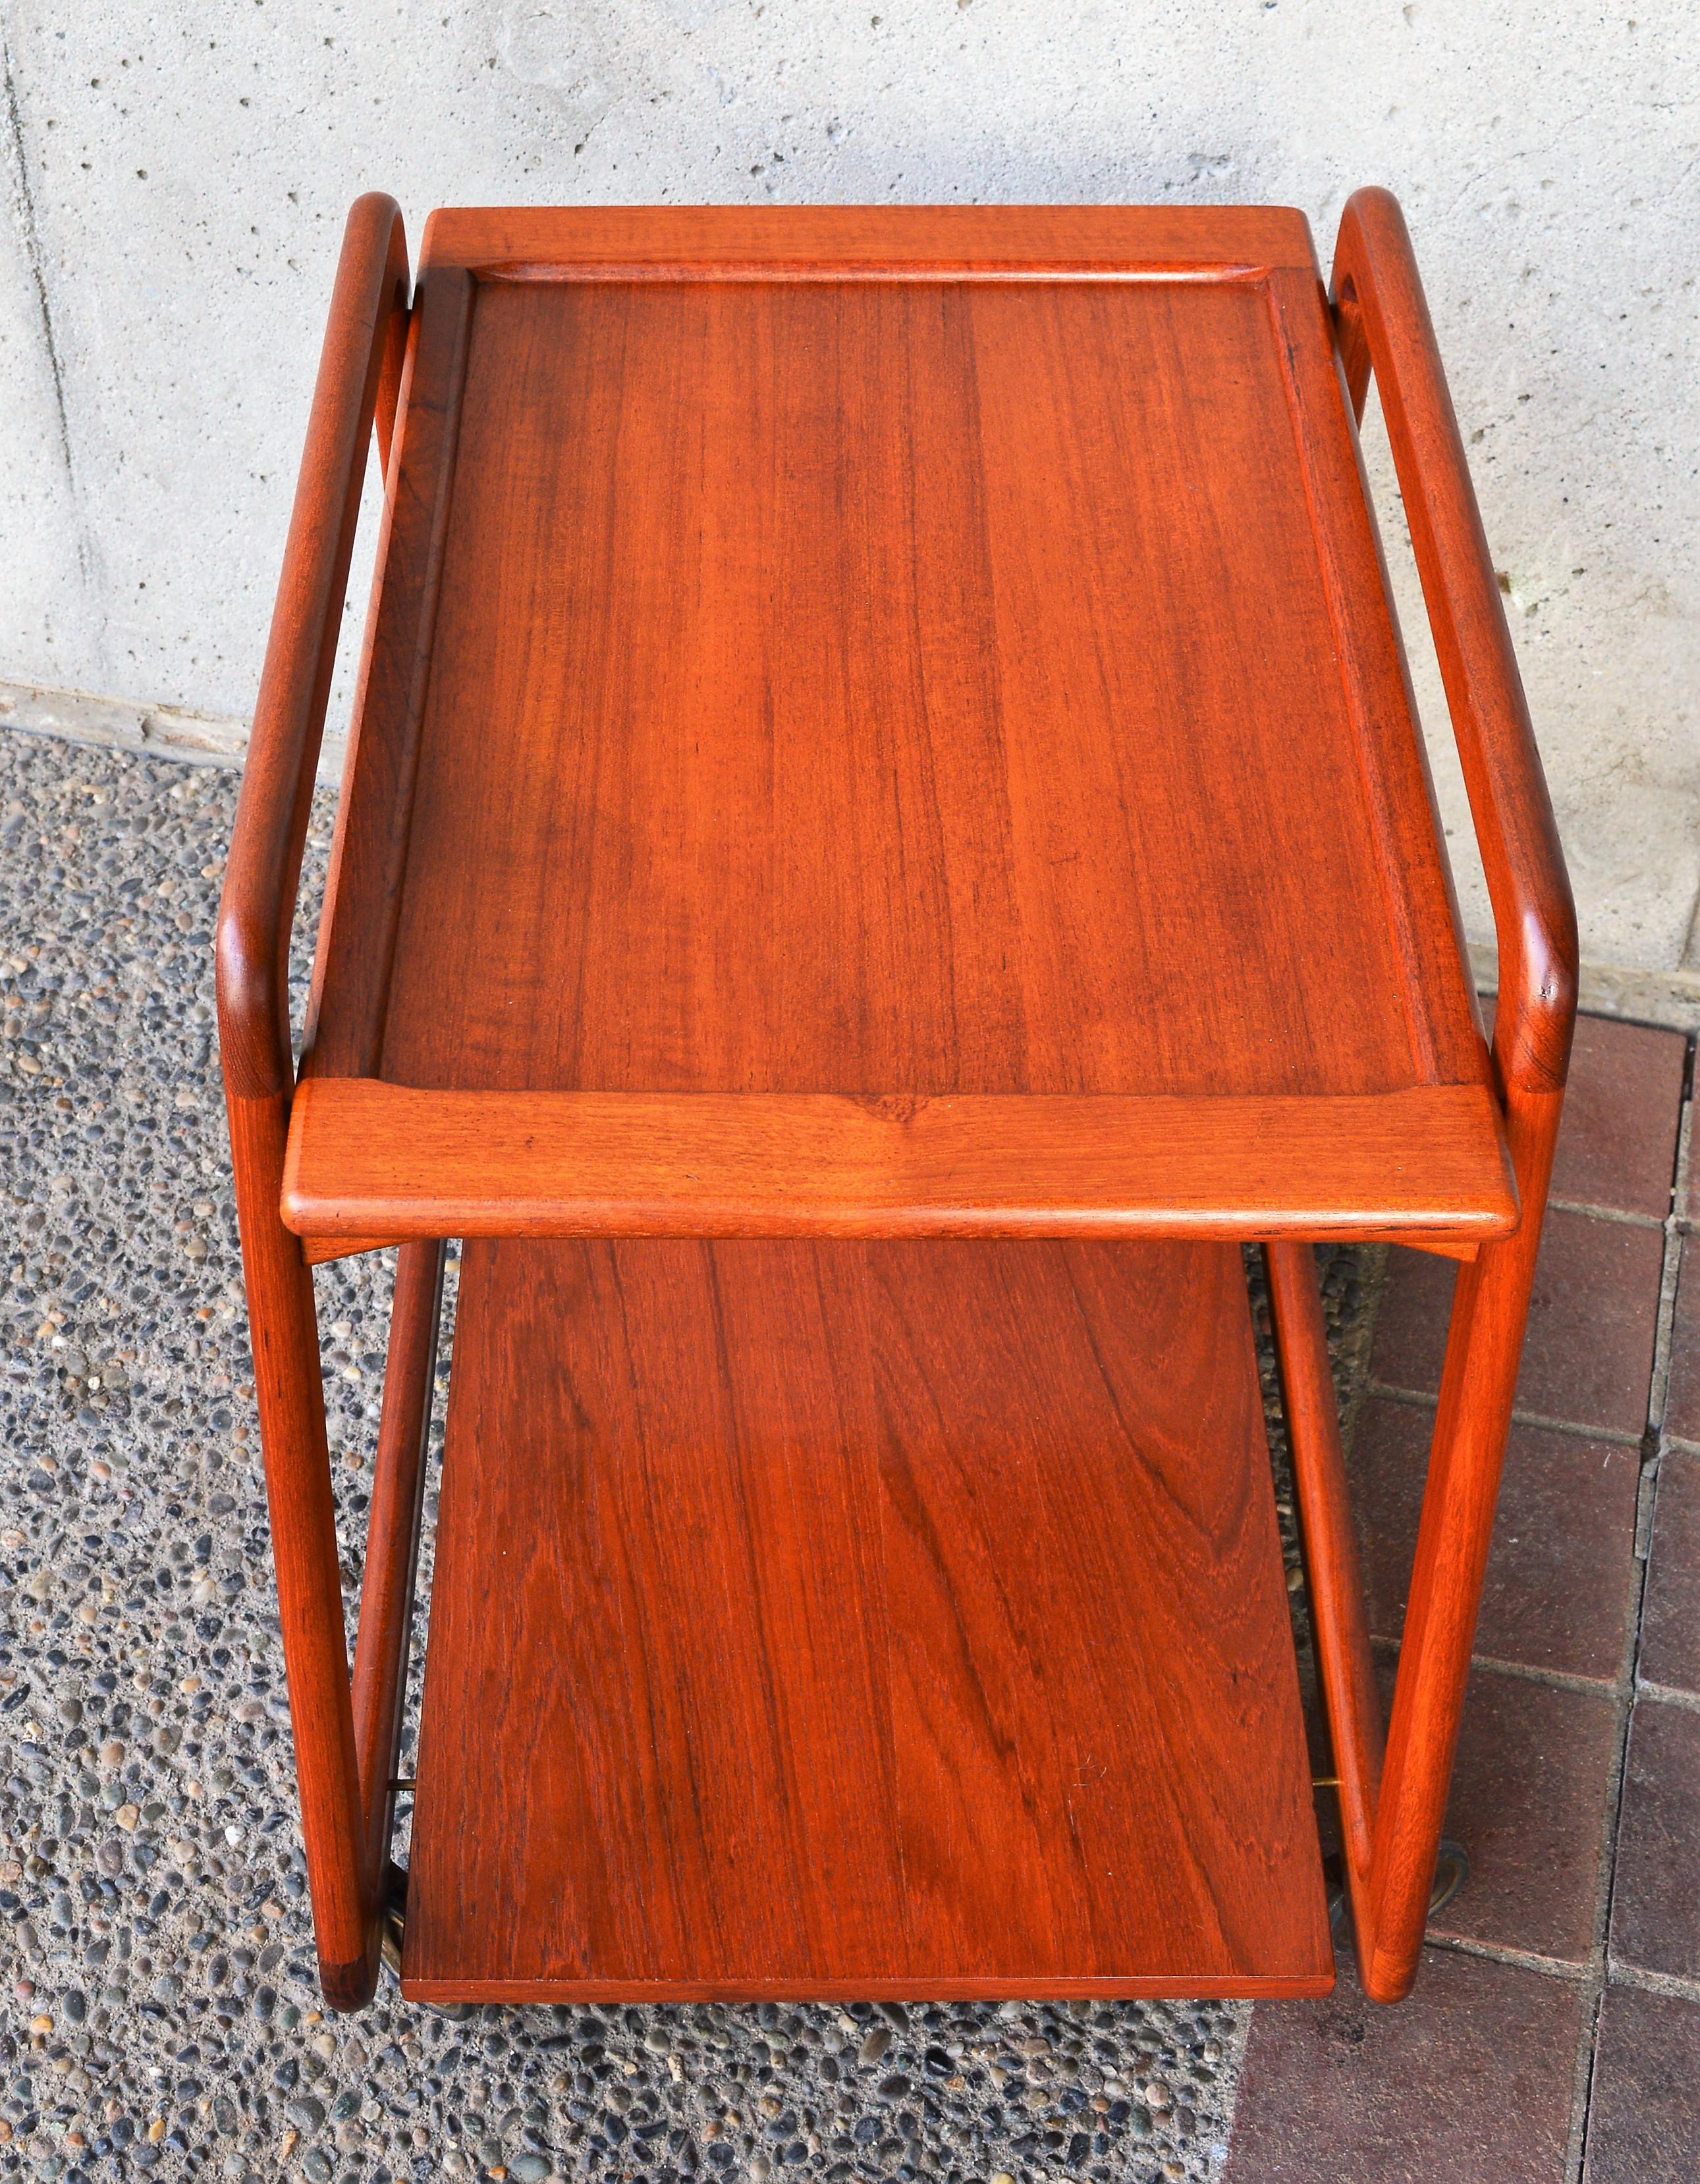 Mid-20th Century Teak Reversible Tray Top Bar Cart or Tea Trolley by Sika Møbler